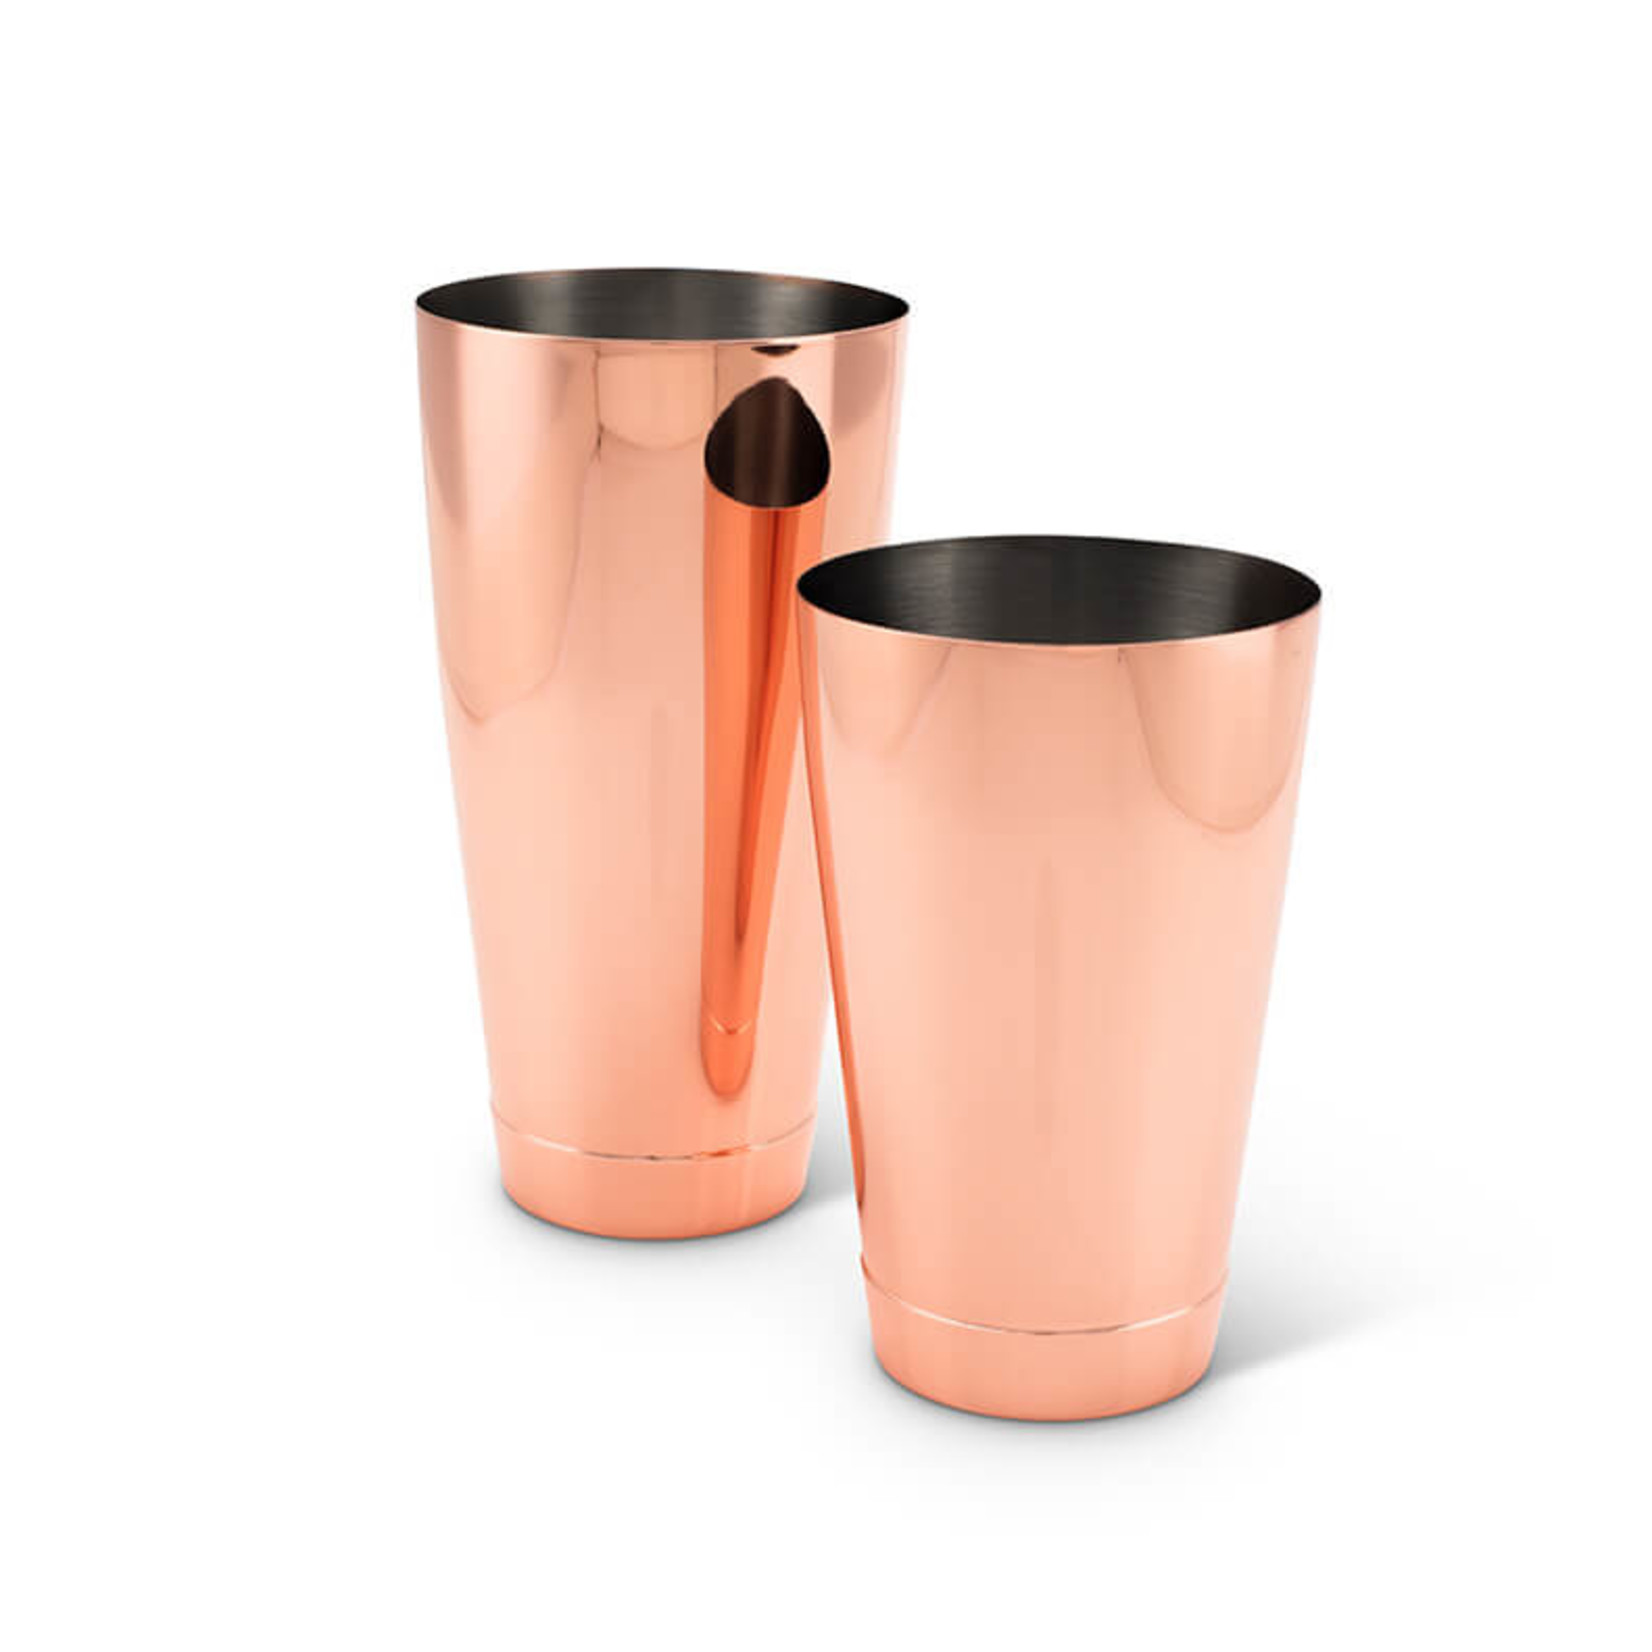 Acopa 2-Piece Boston Shaker Set with 16 oz. Mixing Glass and 28 oz. Copper  Full Size Tin